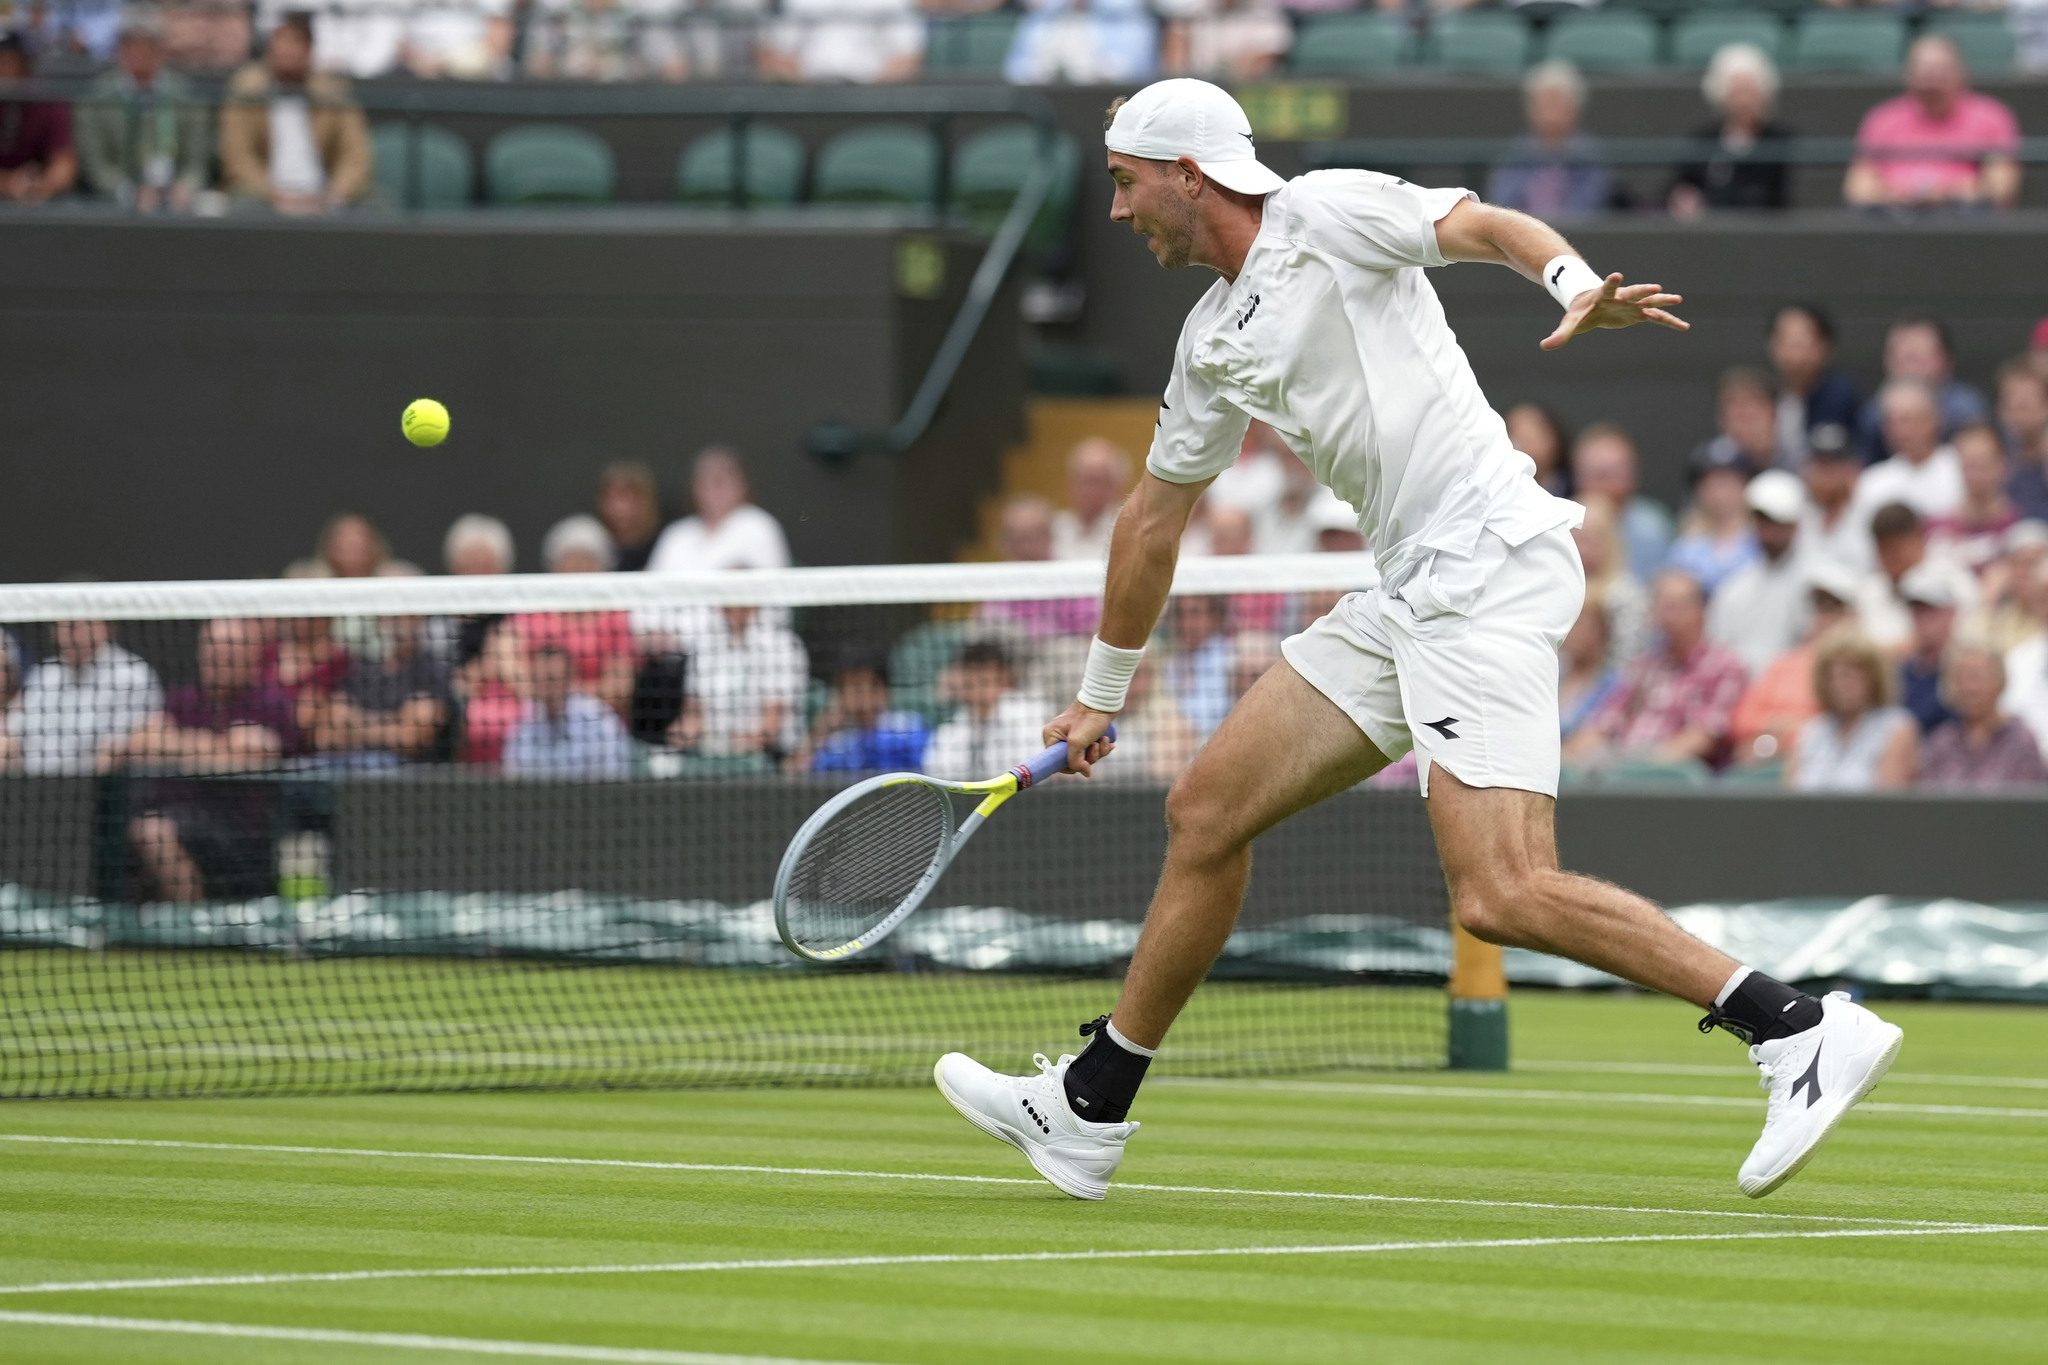 Germany's Jan-Lennard  lt;HIT gt;Struff lt;/HIT gt; returns the ball to Spain's Carlos Alcaraz during their men's singles tennis match on day one of the Wimbledon tennis championships in London, Monday, June 27, 2022. (AP Photo/Alberto Pezzali)